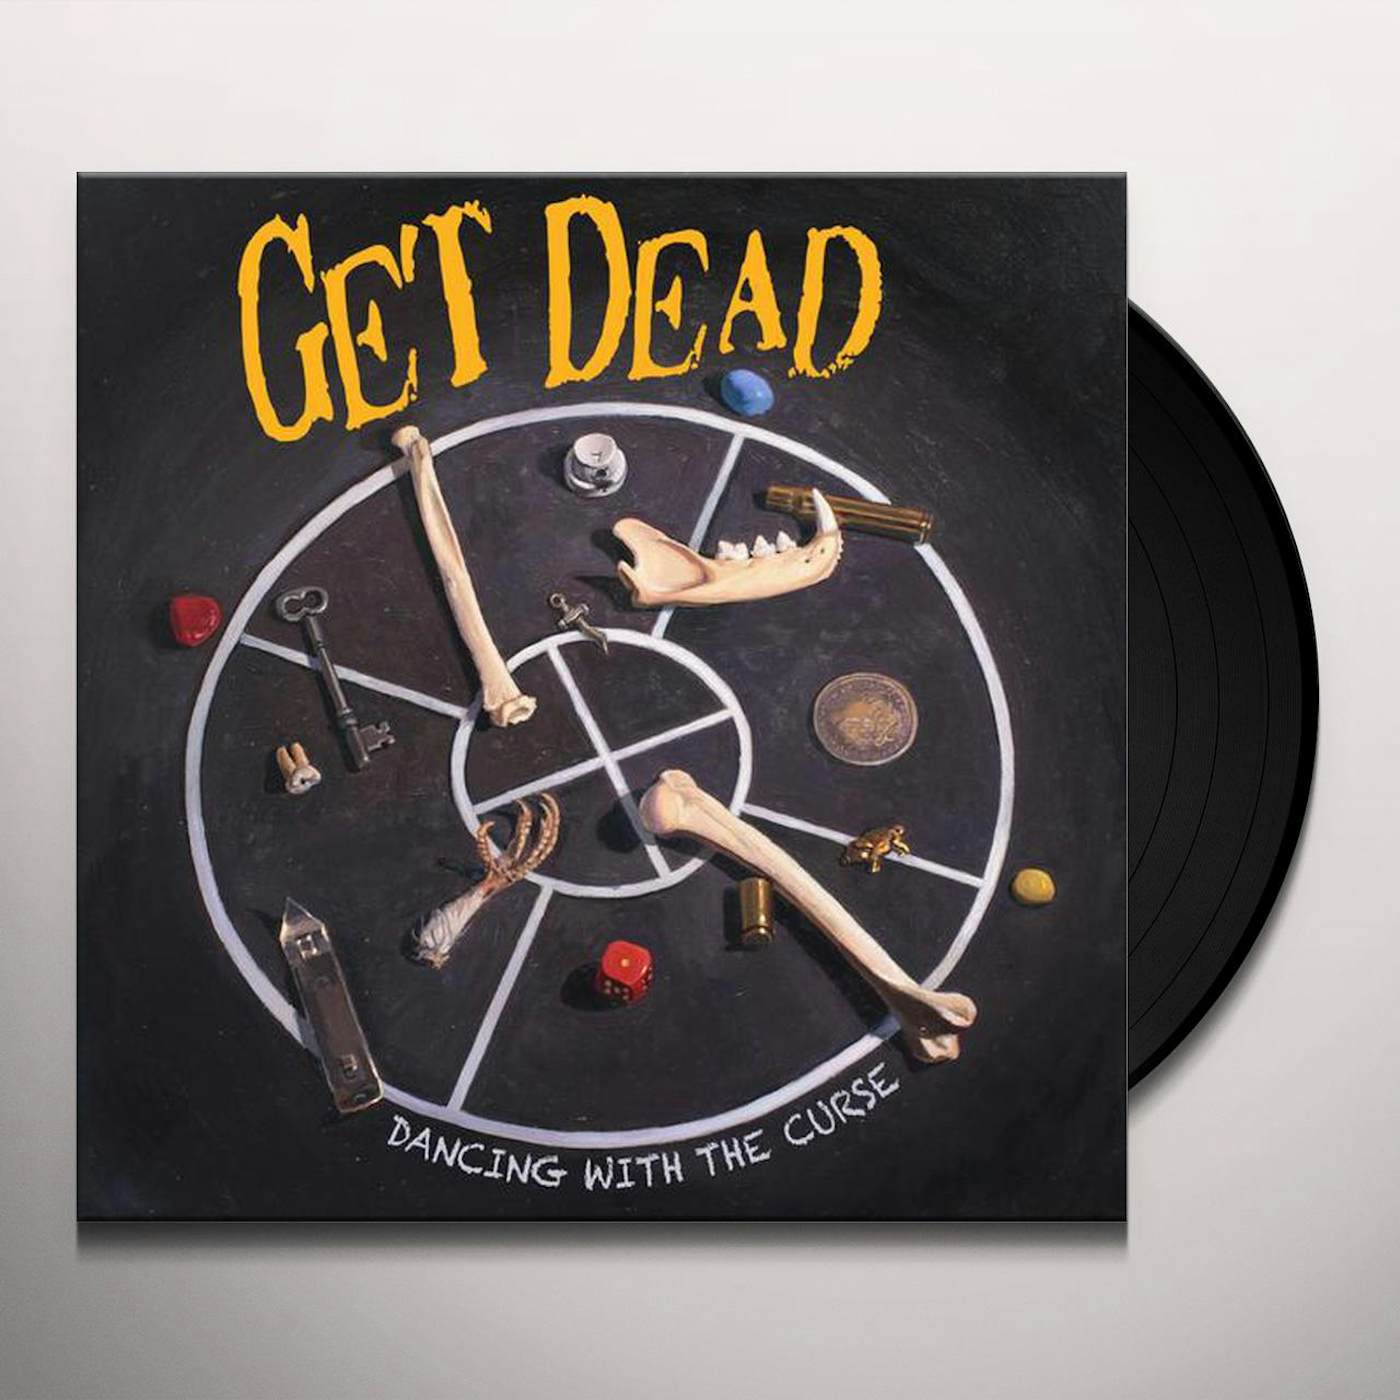 Get Dead Dancing with the Curse Vinyl Record